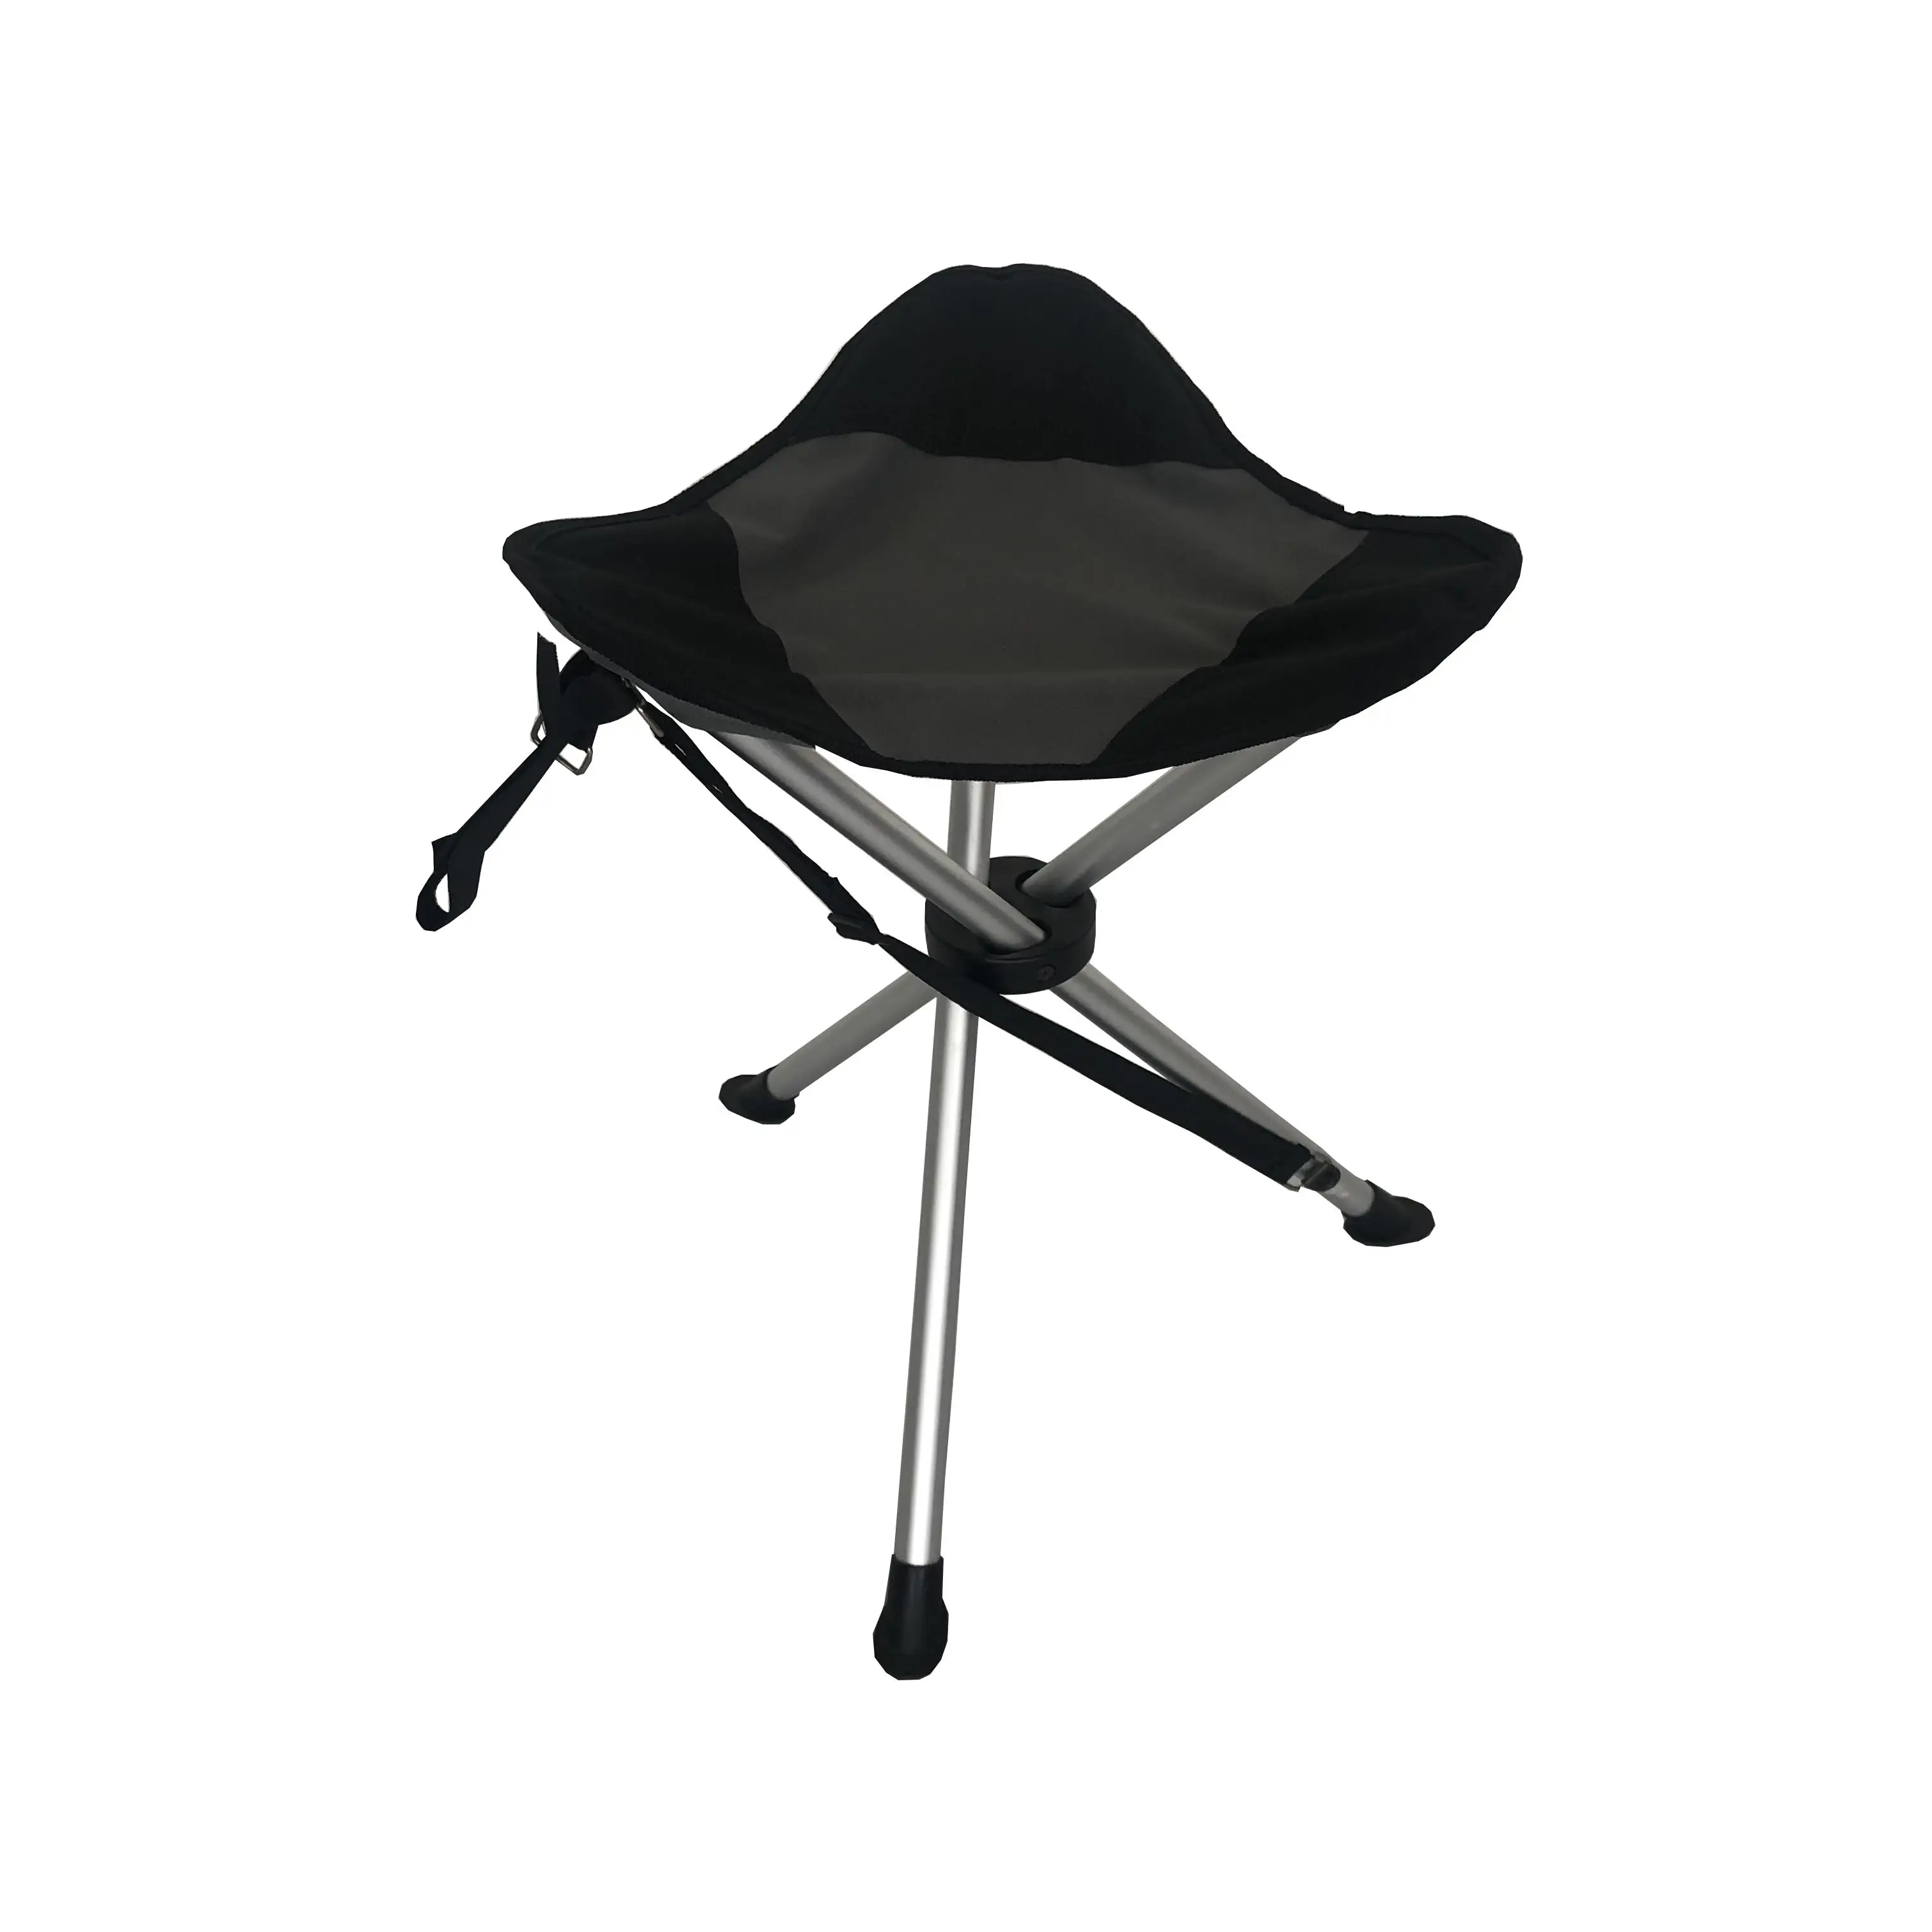 oversize cheap steel frame portable tripod camping chairs outdoor stools folding fishing chair for garden travelling